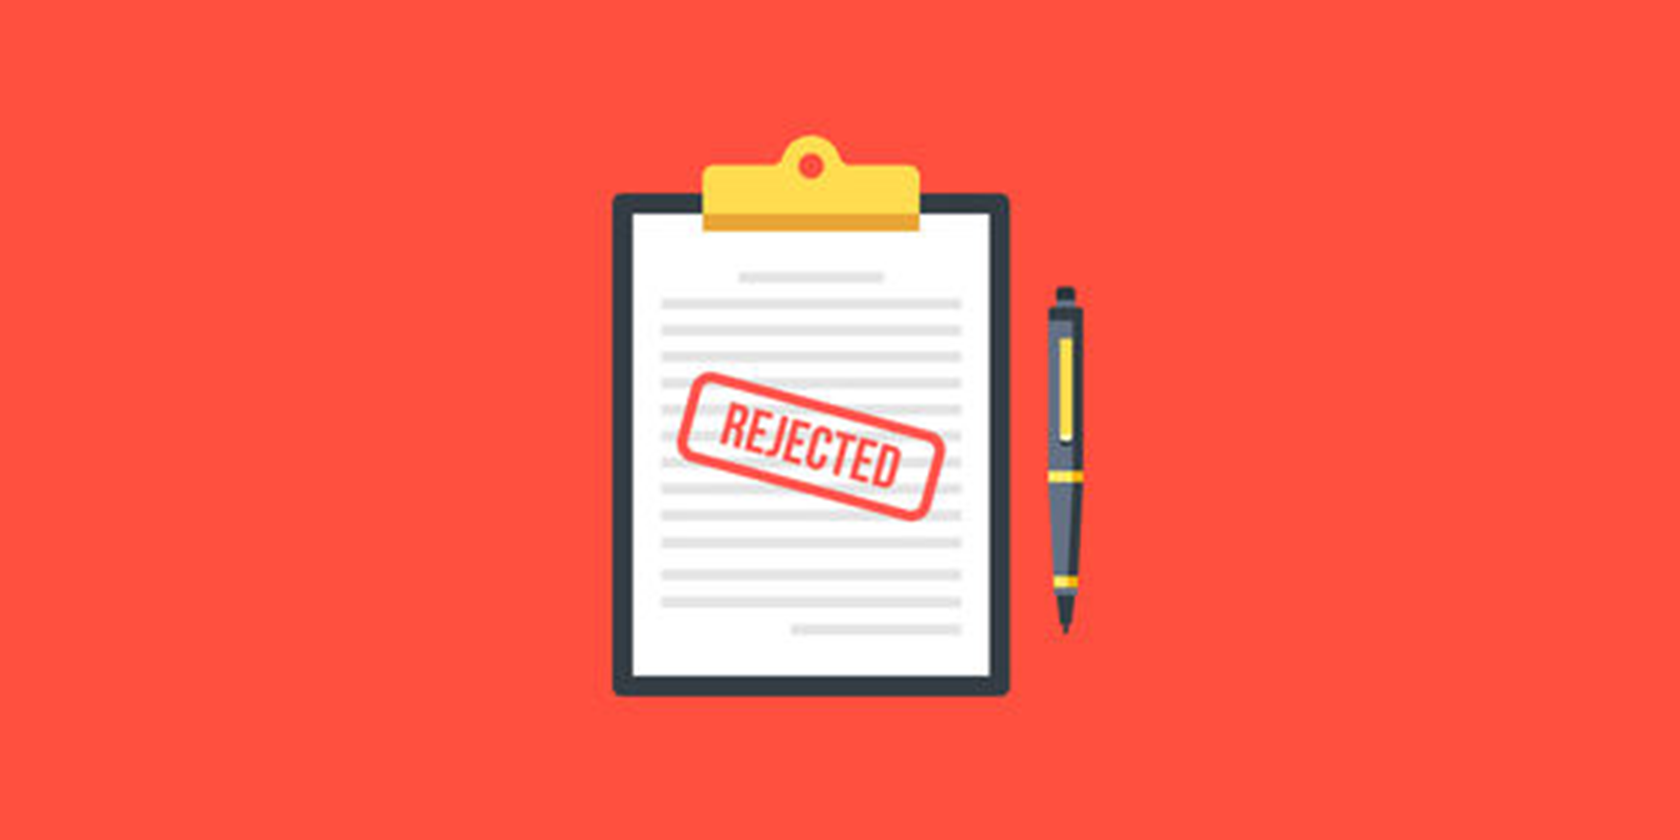 Document Rejection